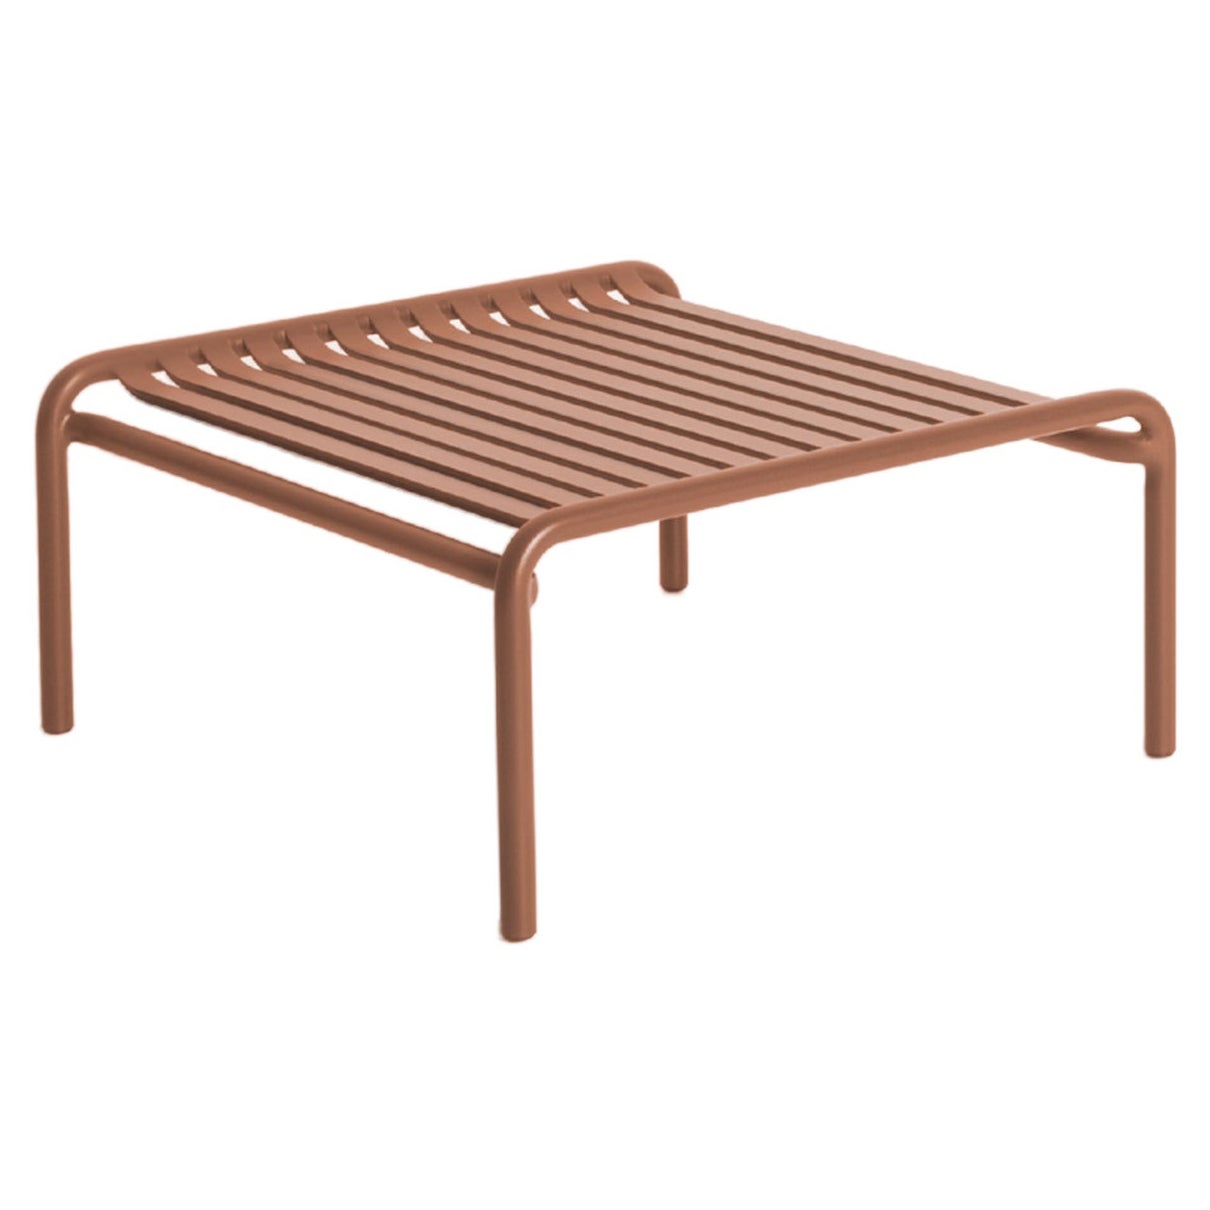 Petite Friture Week-End Coffee Table in Terracotta Aluminium, 2017 For Sale